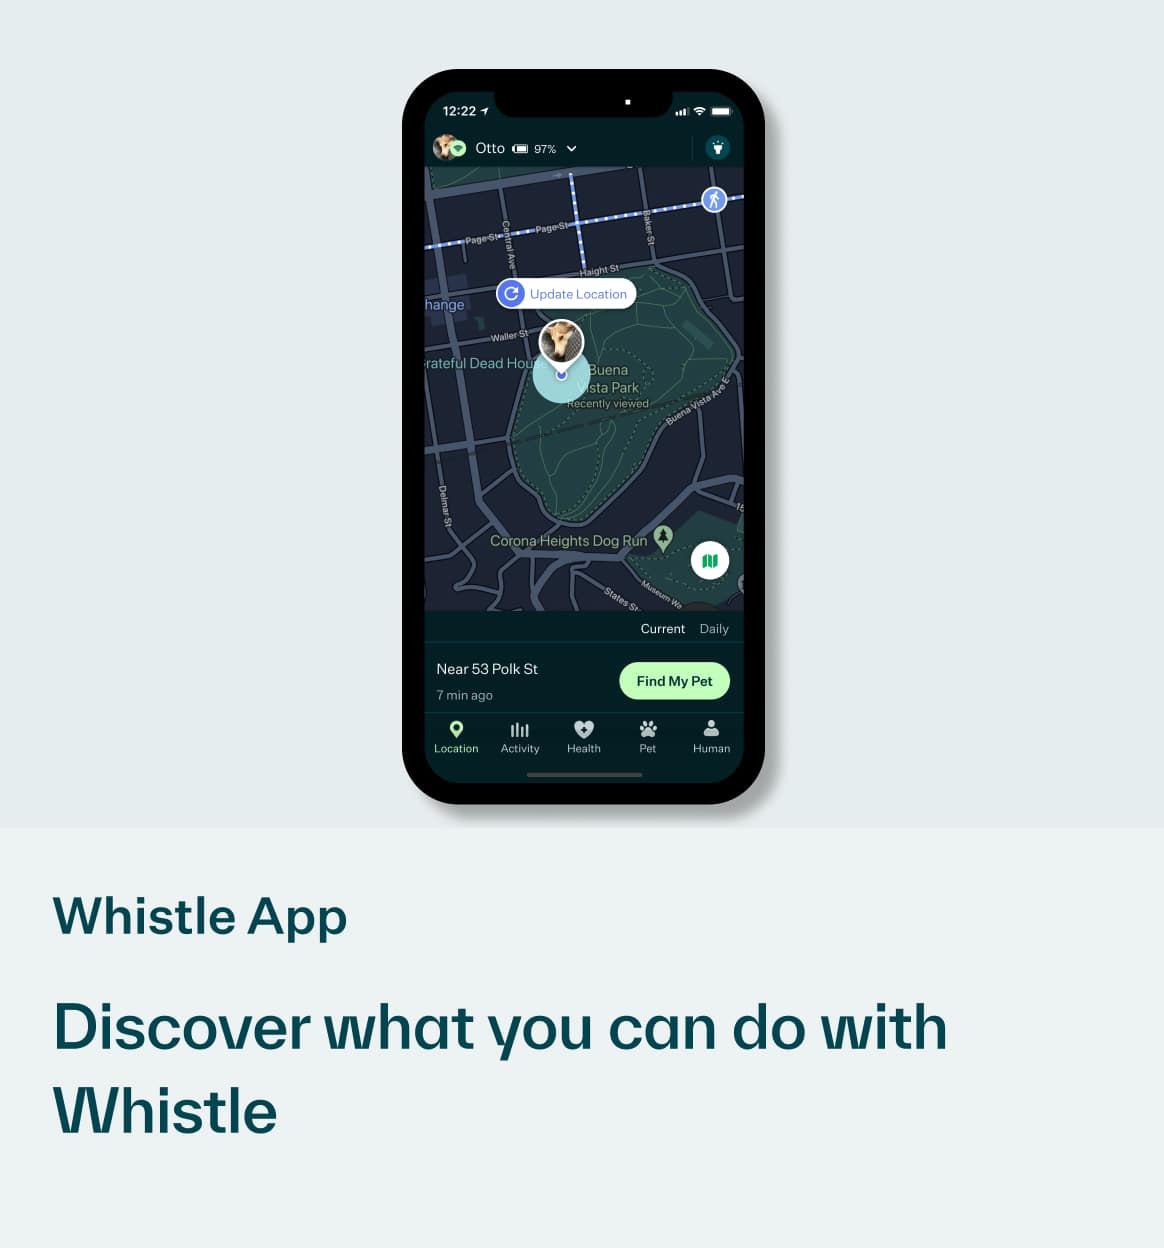 Discover what you can do with Whistle